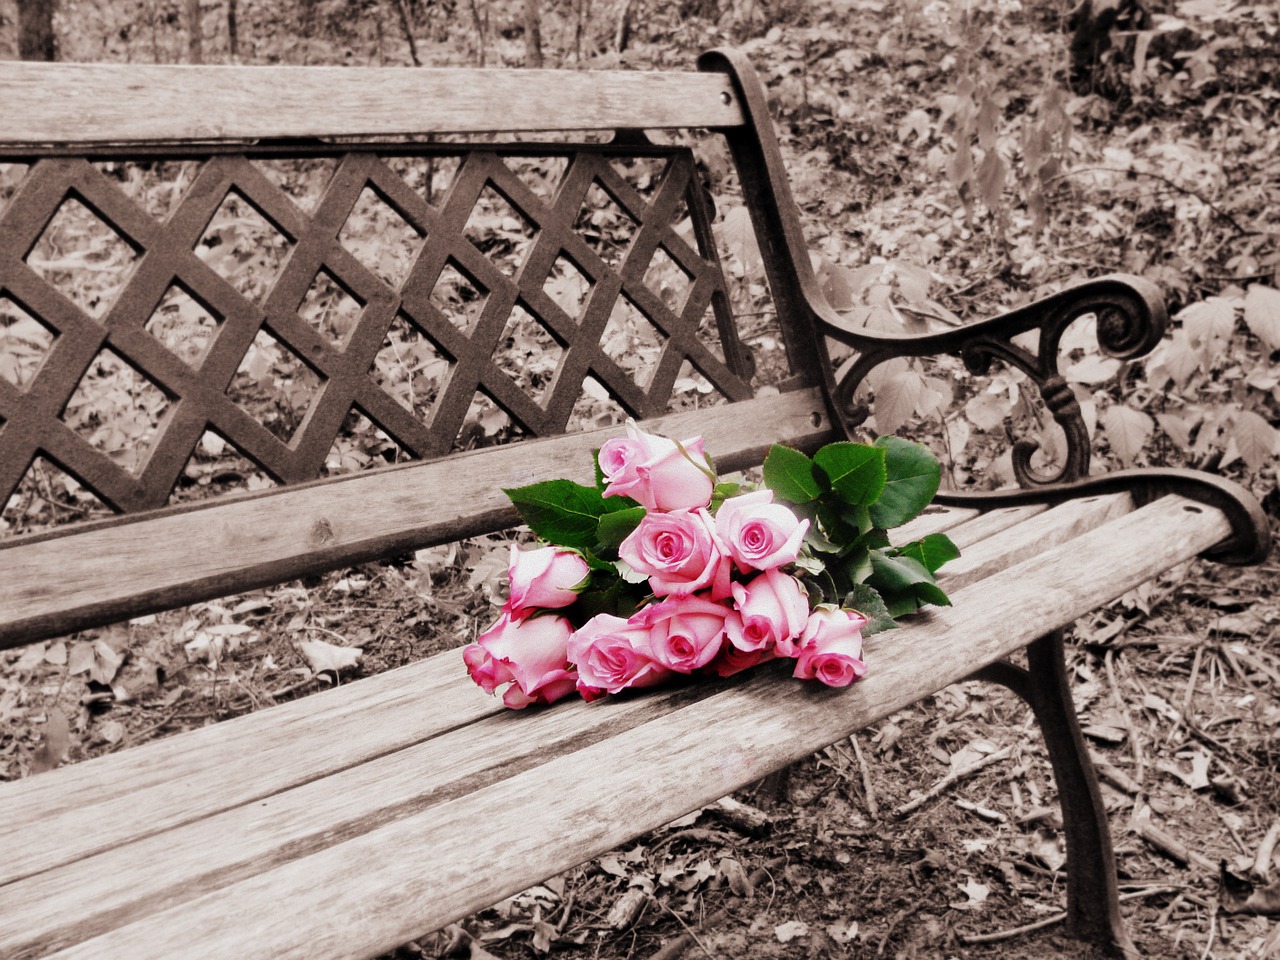 roses on bench selective coloring selective color free photo